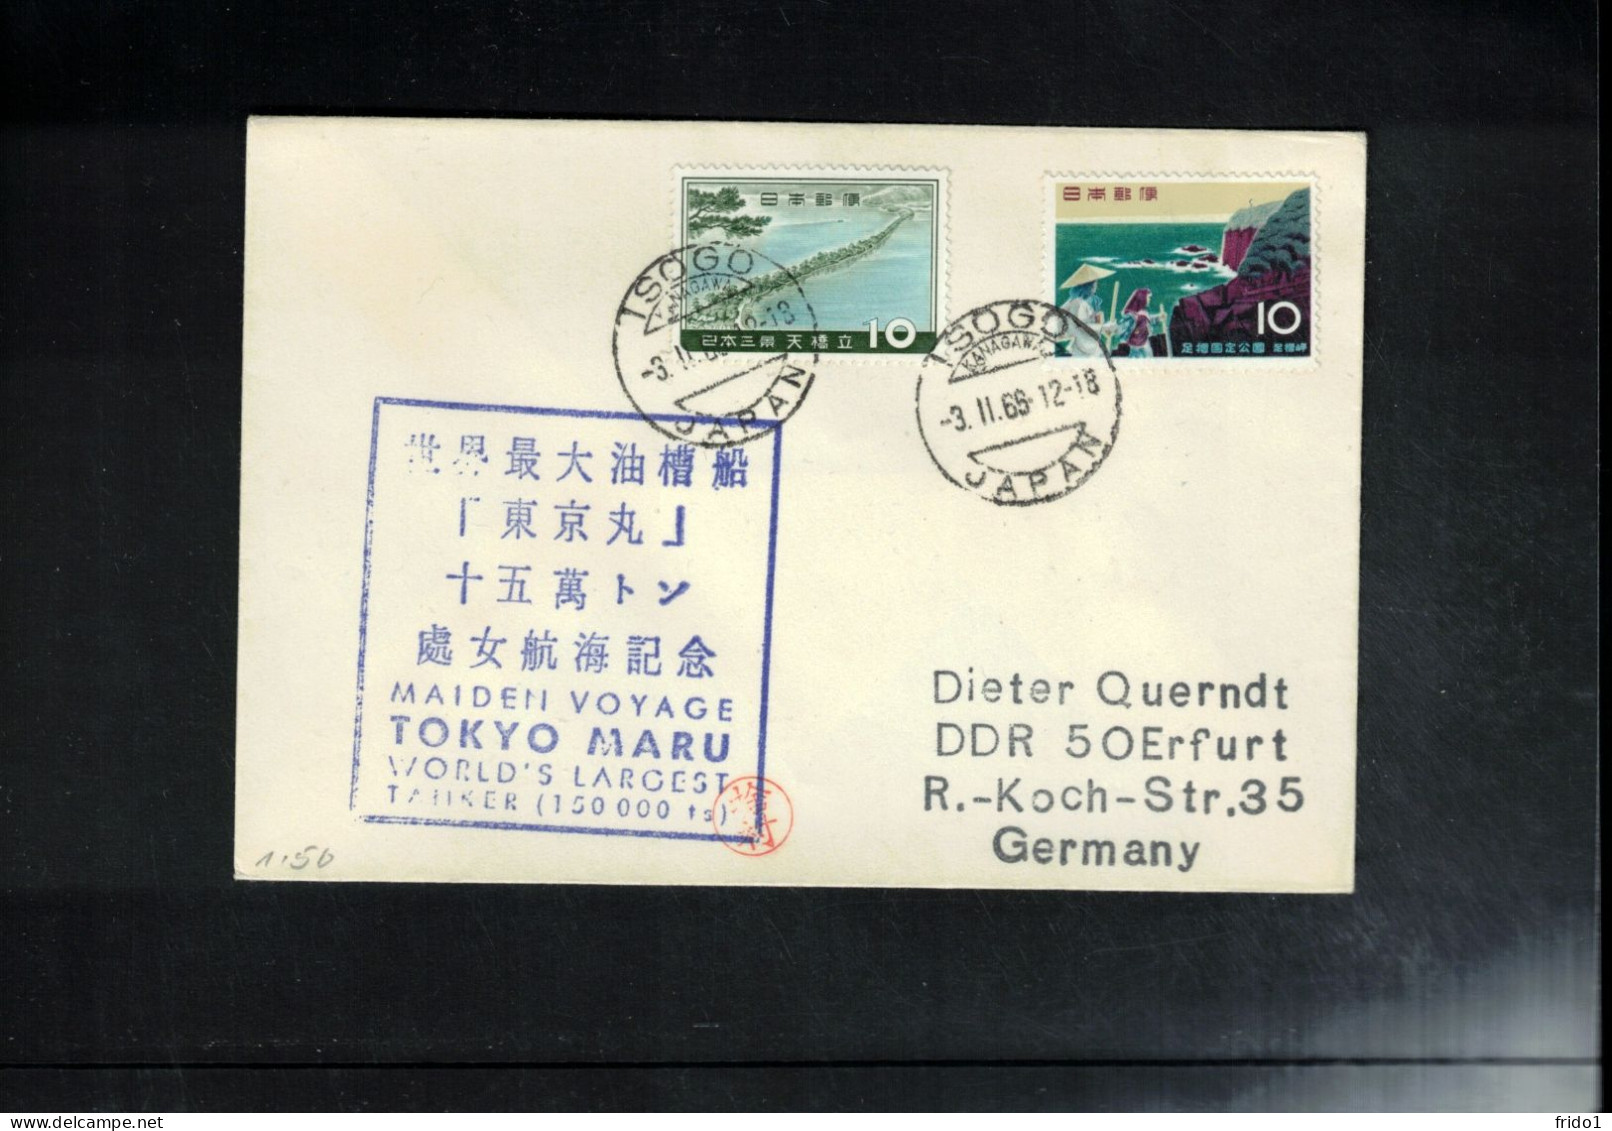 Japan 1966 Maiden Voyage Of TOKYO MARU World's Largest Tanker Interesting Cover - Covers & Documents